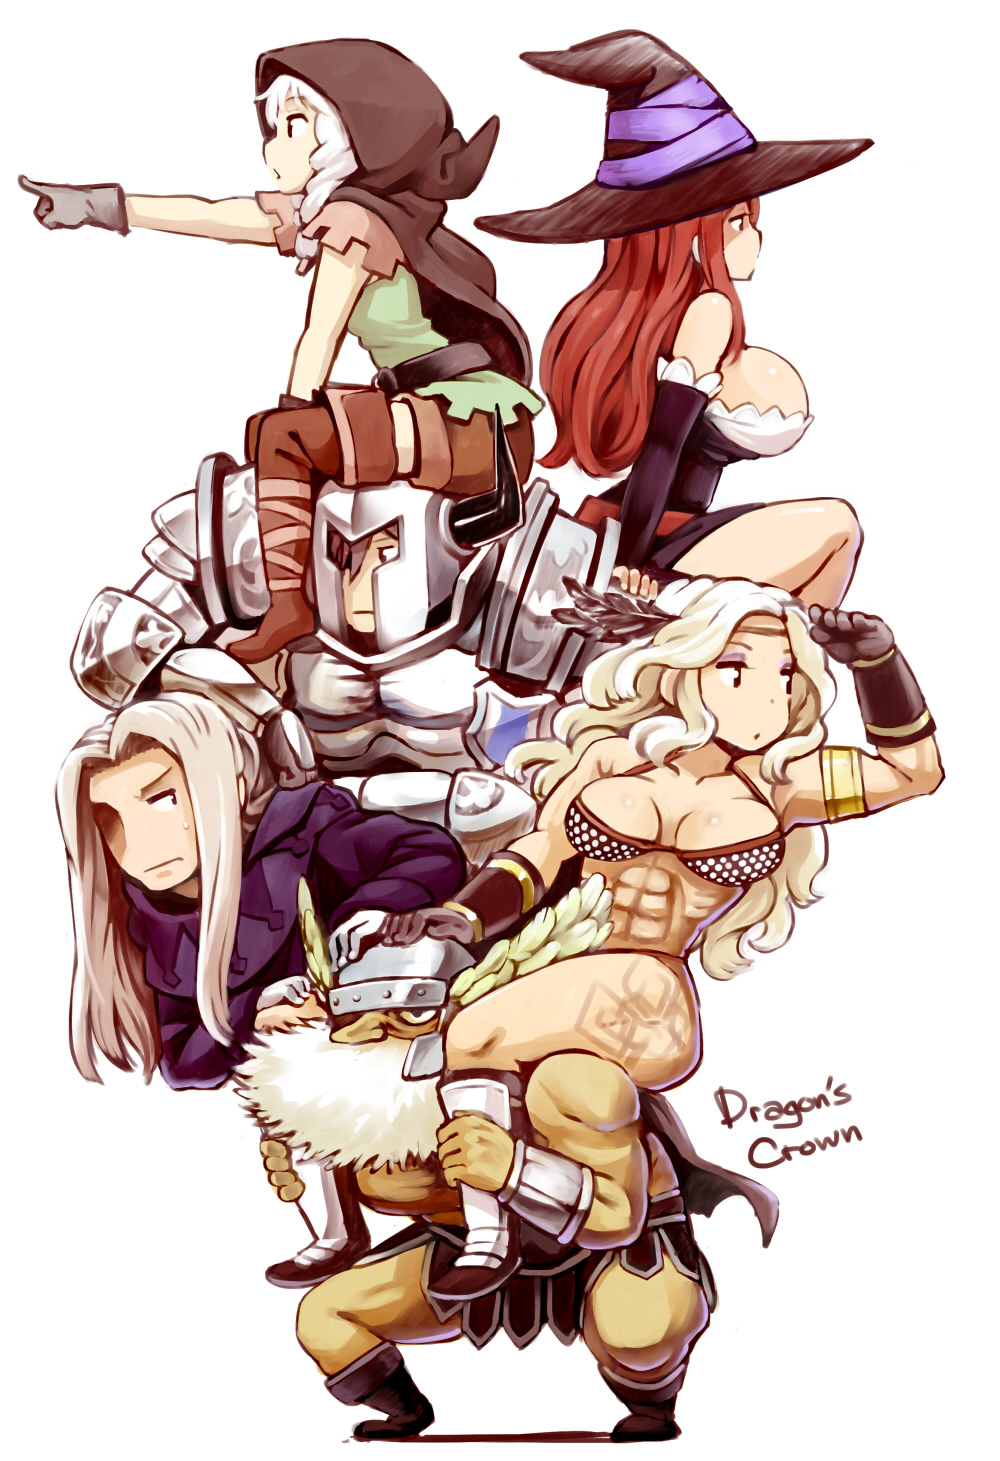 3girls abs amazon_(dragon's_crown) armor bare_shoulders beard blonde_hair boots braid breasts brown_eyes brown_hair carrying cleavage detached_sleeves dragon's_crown dwarf dwarf_(dragon's_crown) elf elf_(dragon's_crown) facial_hair fighter_(dragon's_crown) gloves hair_over_one_eye hat helmet highres hood huge_breasts large_breasts long_hair multiple_boys multiple_girls muscle muscular_female nagian open_mouth piggyback pointing pointy_ears shorts sorceress_(dragon's_crown) sweatdrop thigh_boots thighhighs twin_braids white_background white_hair winged_helmet witch_hat wizard_(dragon's_crown)